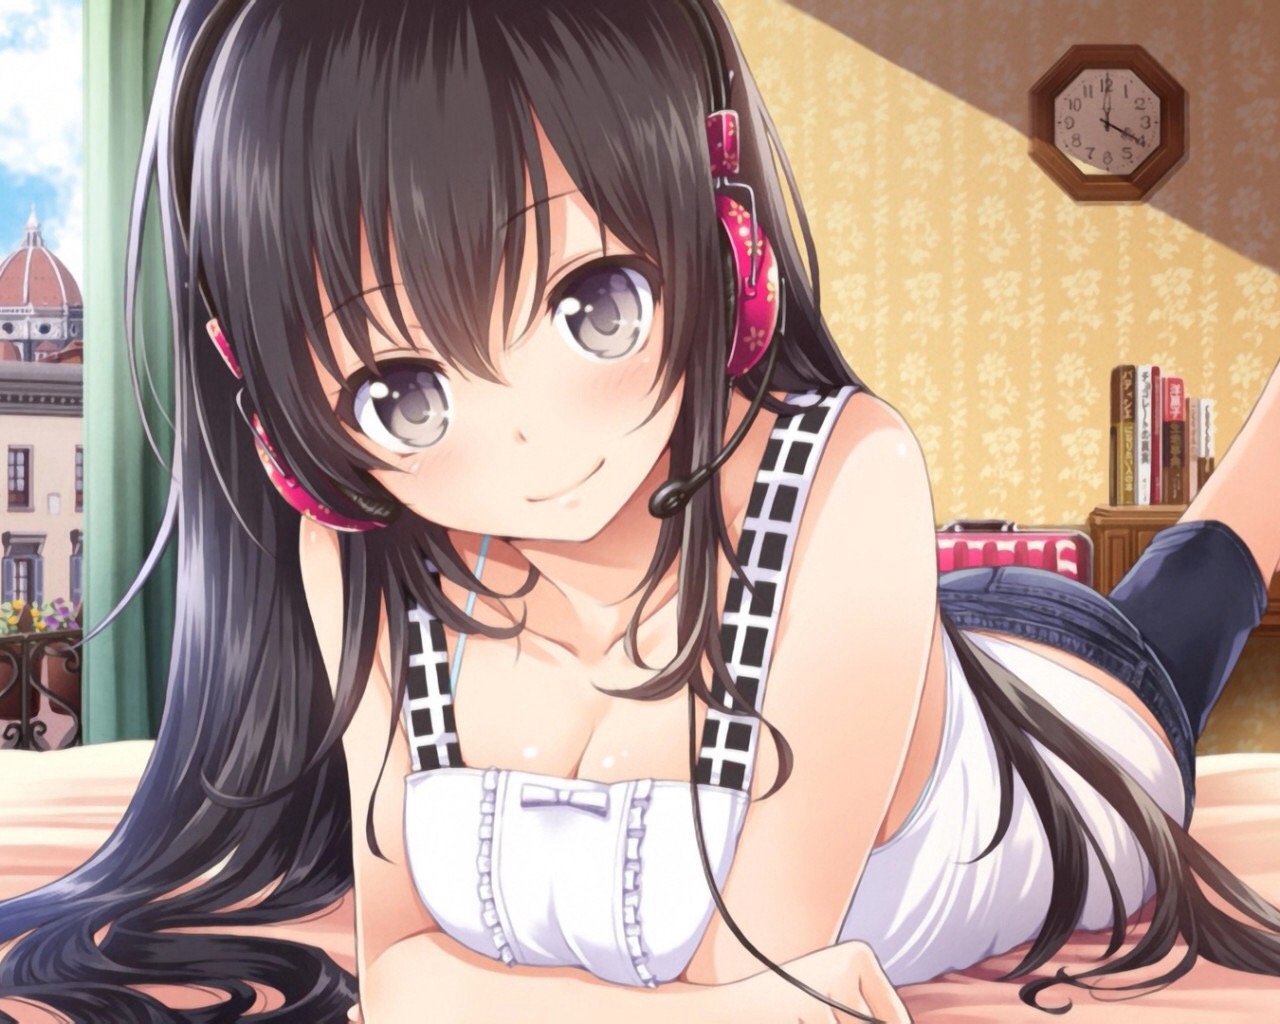 freetoedit anime girl headphones bed image by @anime_cats.